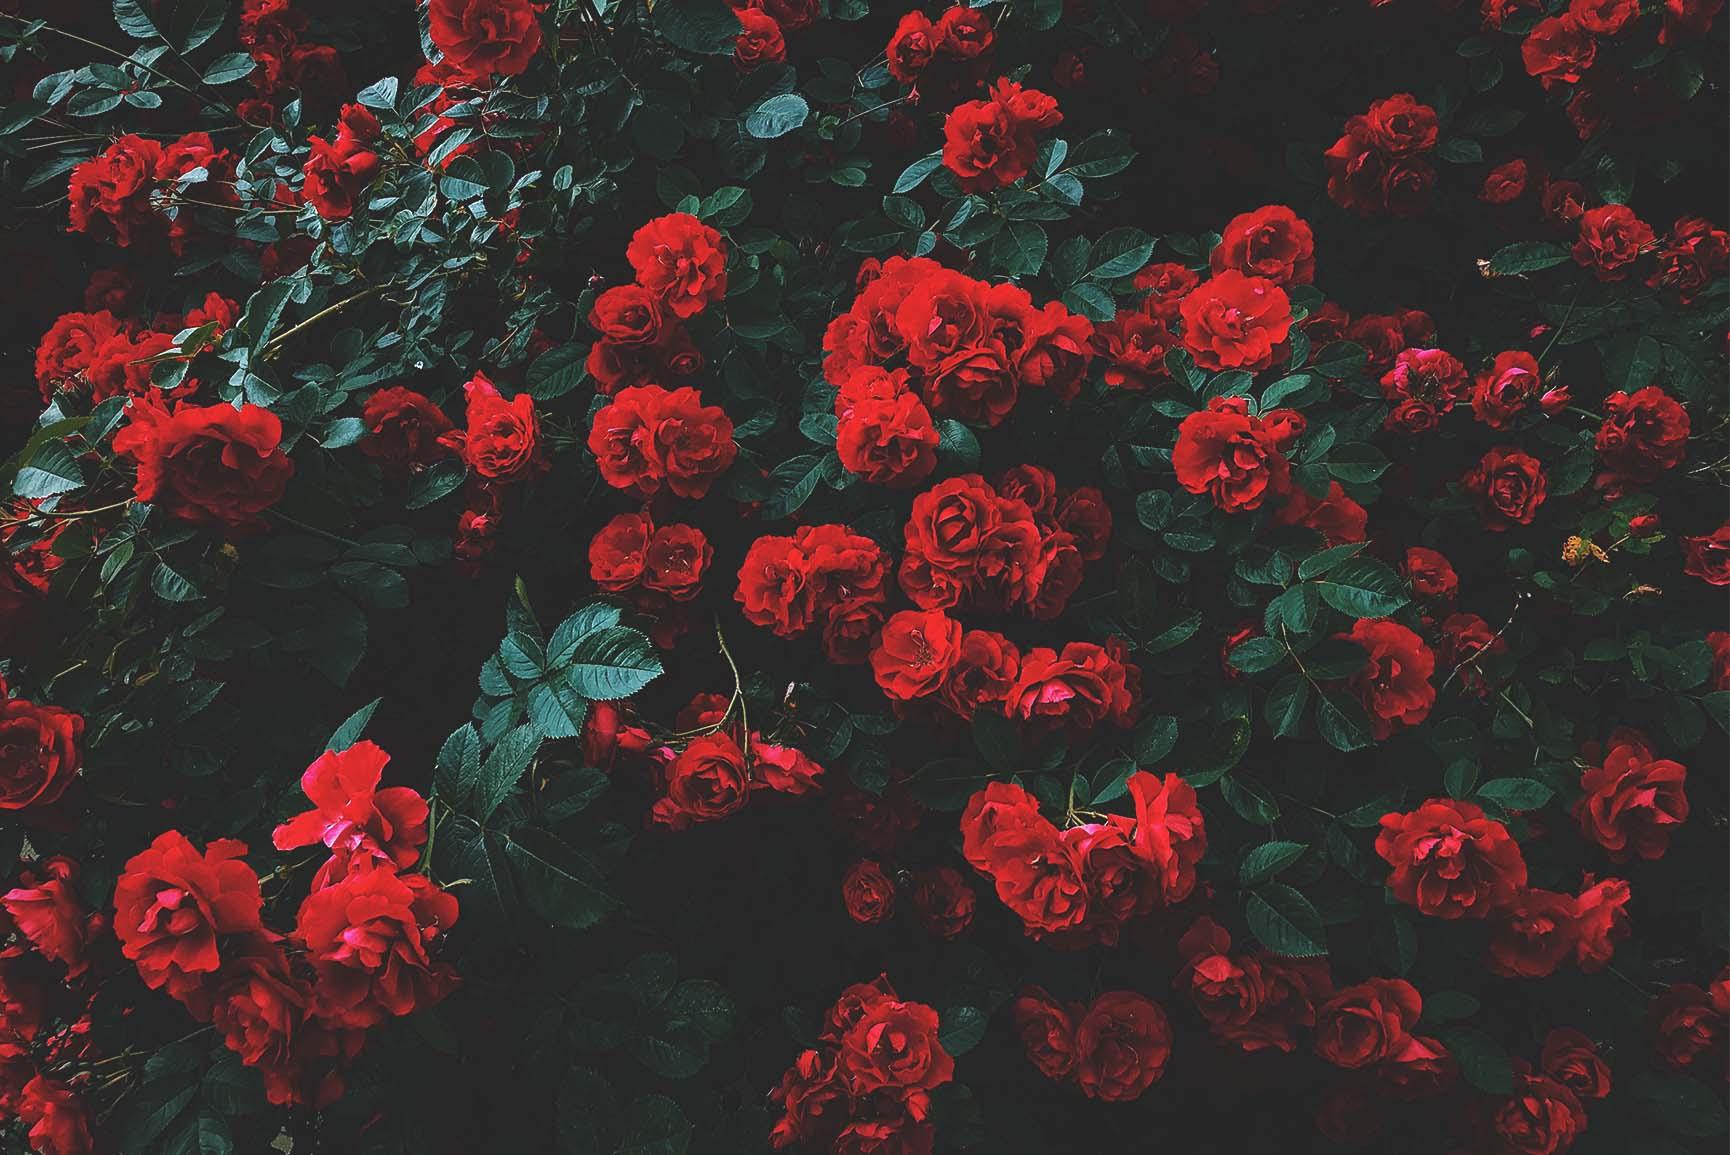 A Dozen Red Roses iPhone Wallpaper for Valentine's Day. Preppy